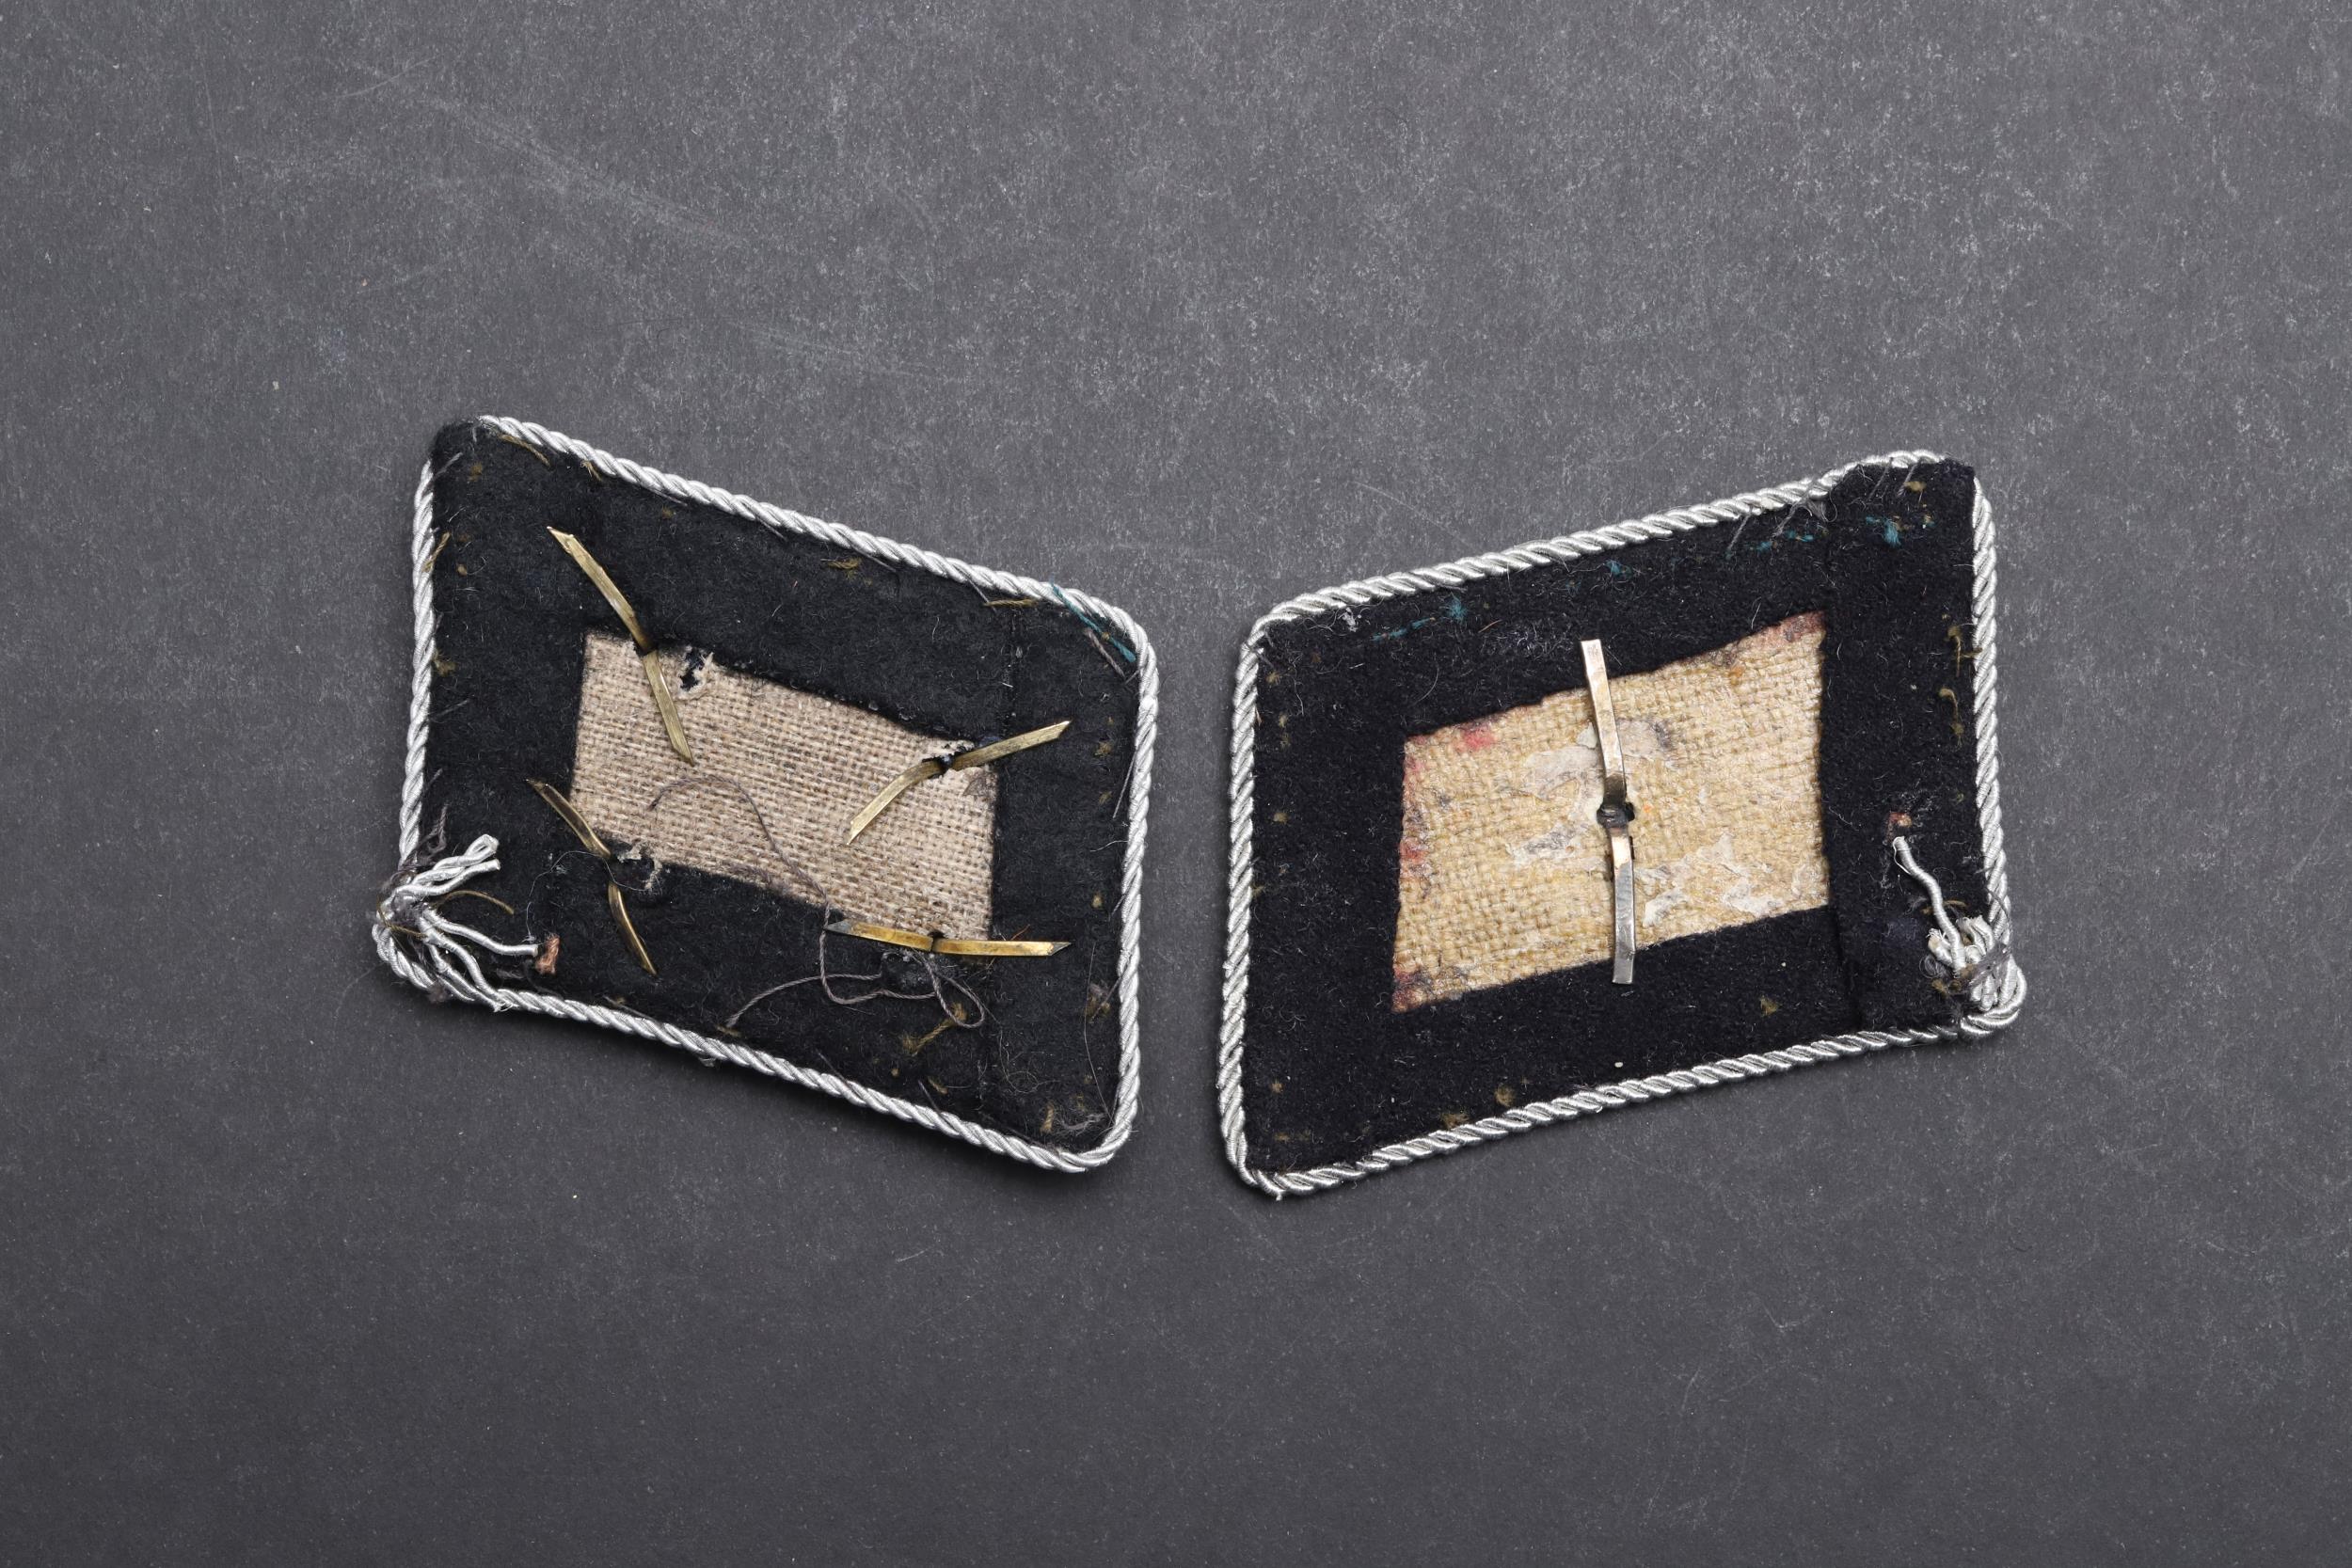 A PAIR OF SECOND WORLD WAR GERMAN SS OFFICER'S COLLAR PATCHES. - Image 3 of 3